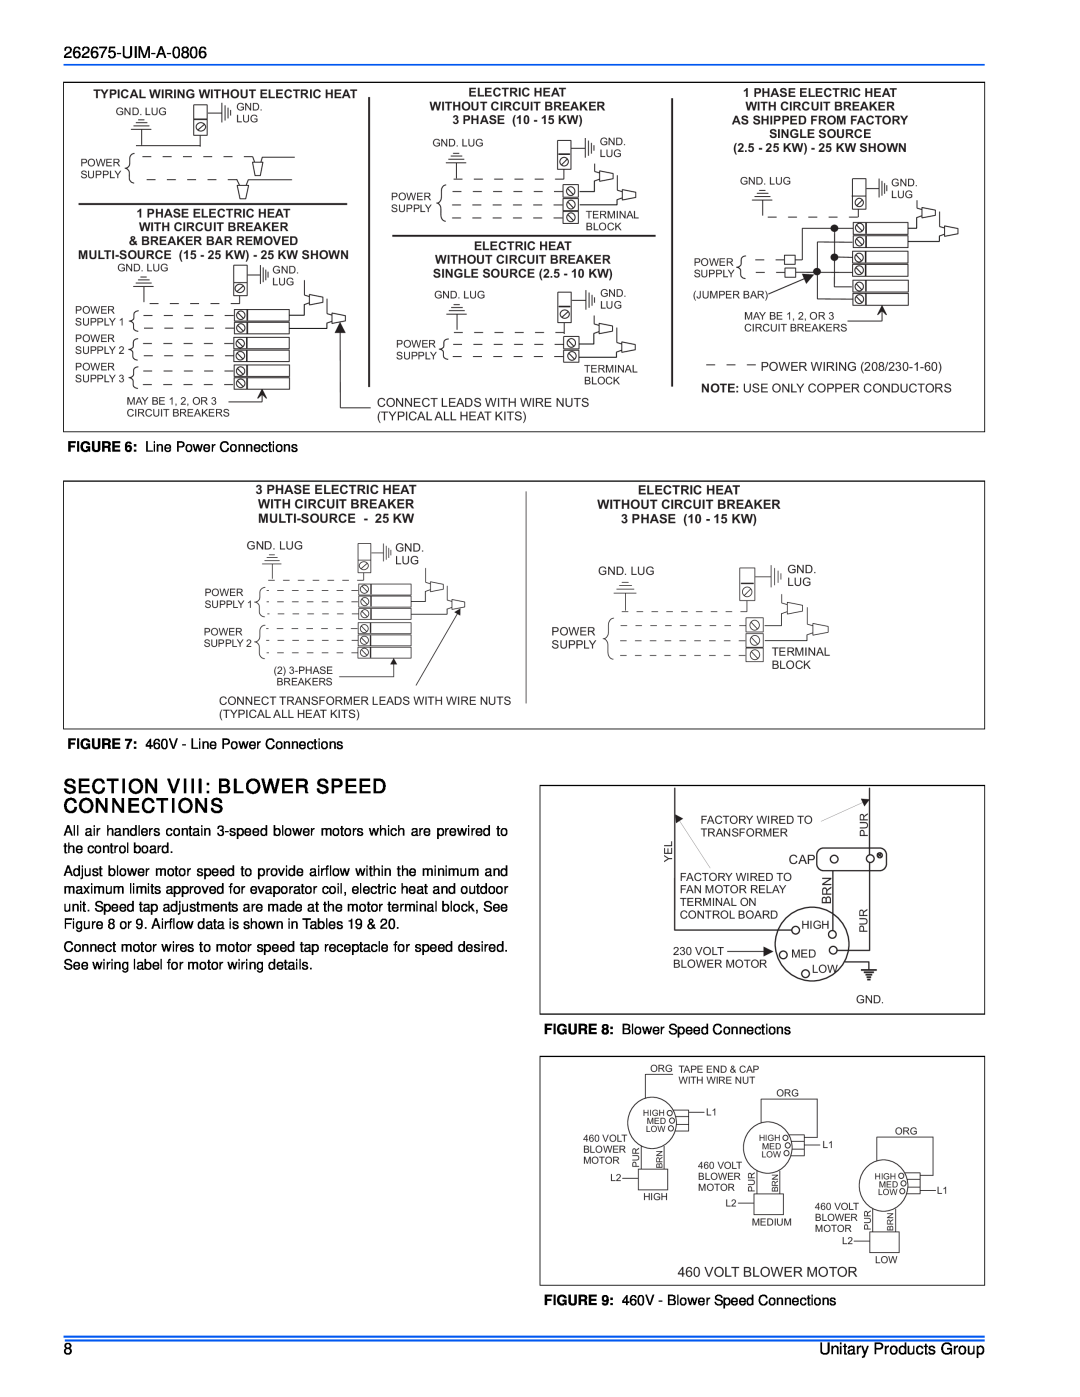 York MA installation manual Section Viii Blower Speed Connections, UIM-A-0806 